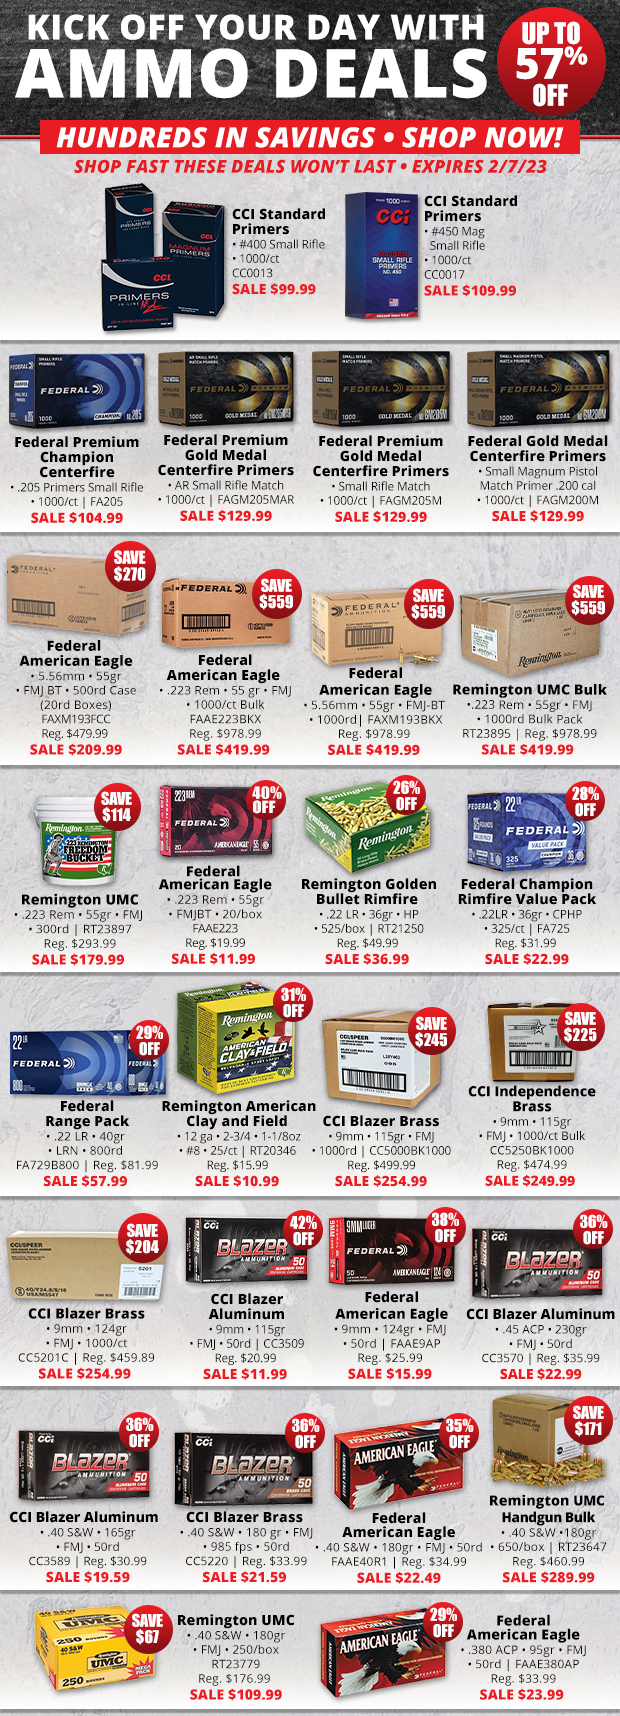 Ammo Deals up to 57% Off  Hundreds in Savings